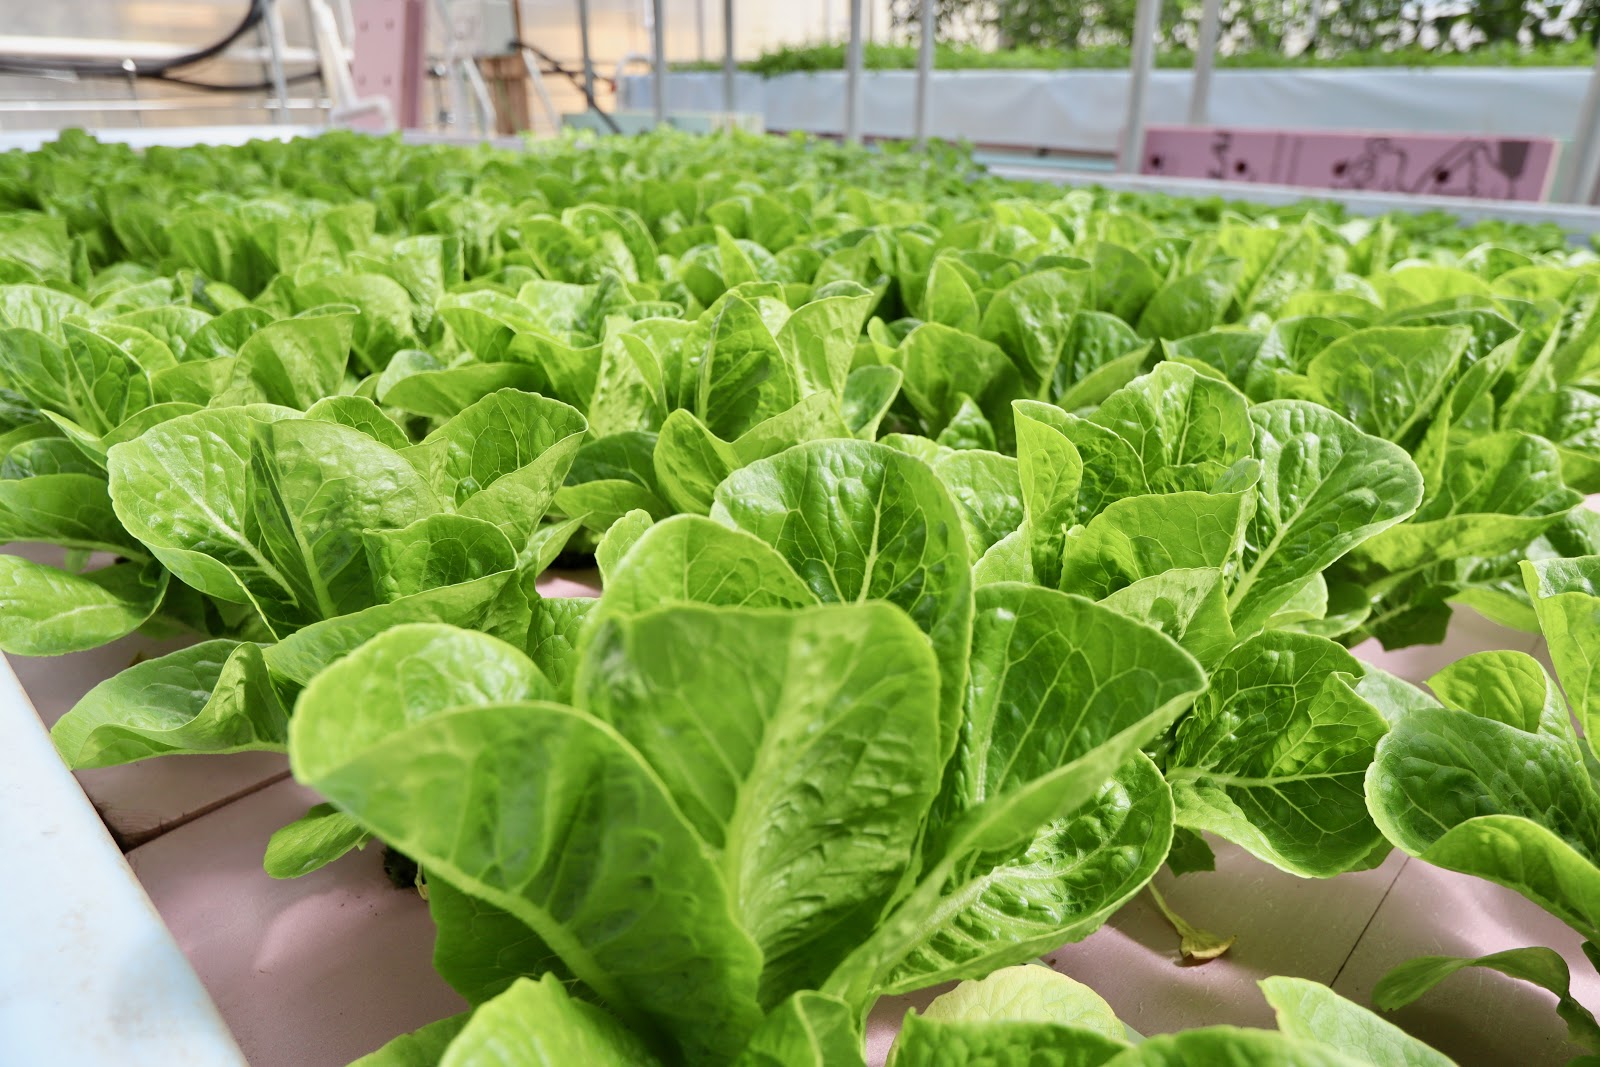 Rows of lettuce at Southern Organics. (Photo by Christine Hull for Bham Now) ﻿